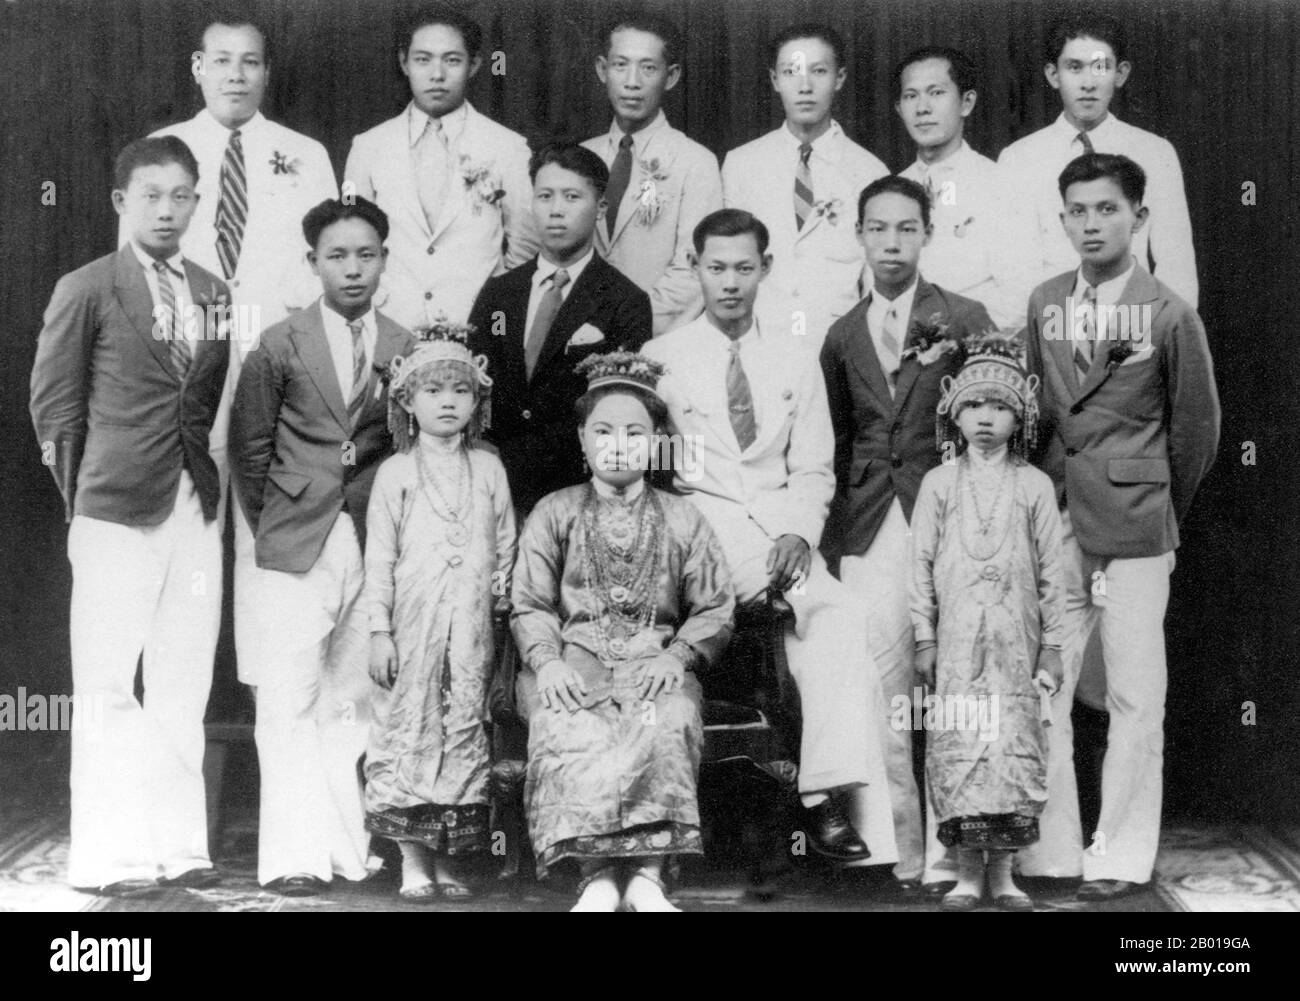 Thailand: A group of prosperous citizens of Phuket in 1942. The dress of the woman and two small girls indicate that they are ethnic Chinese 'Phuket Babas'.  Phuket, formerly known as Talang and, in Western sources, Junk Ceylon (a corruption of the Malay Tanjung Salang, i.e. 'Cape Salang'), is one of the southern provinces (changwat) of Thailand. Neighbouring provinces are (from north clockwise) Phang Nga and Krabi, but as Phuket is an island there are no land boundaries. Phuket, which is approximately the size of Singapore, is Thailand’s largest island. Stock Photo